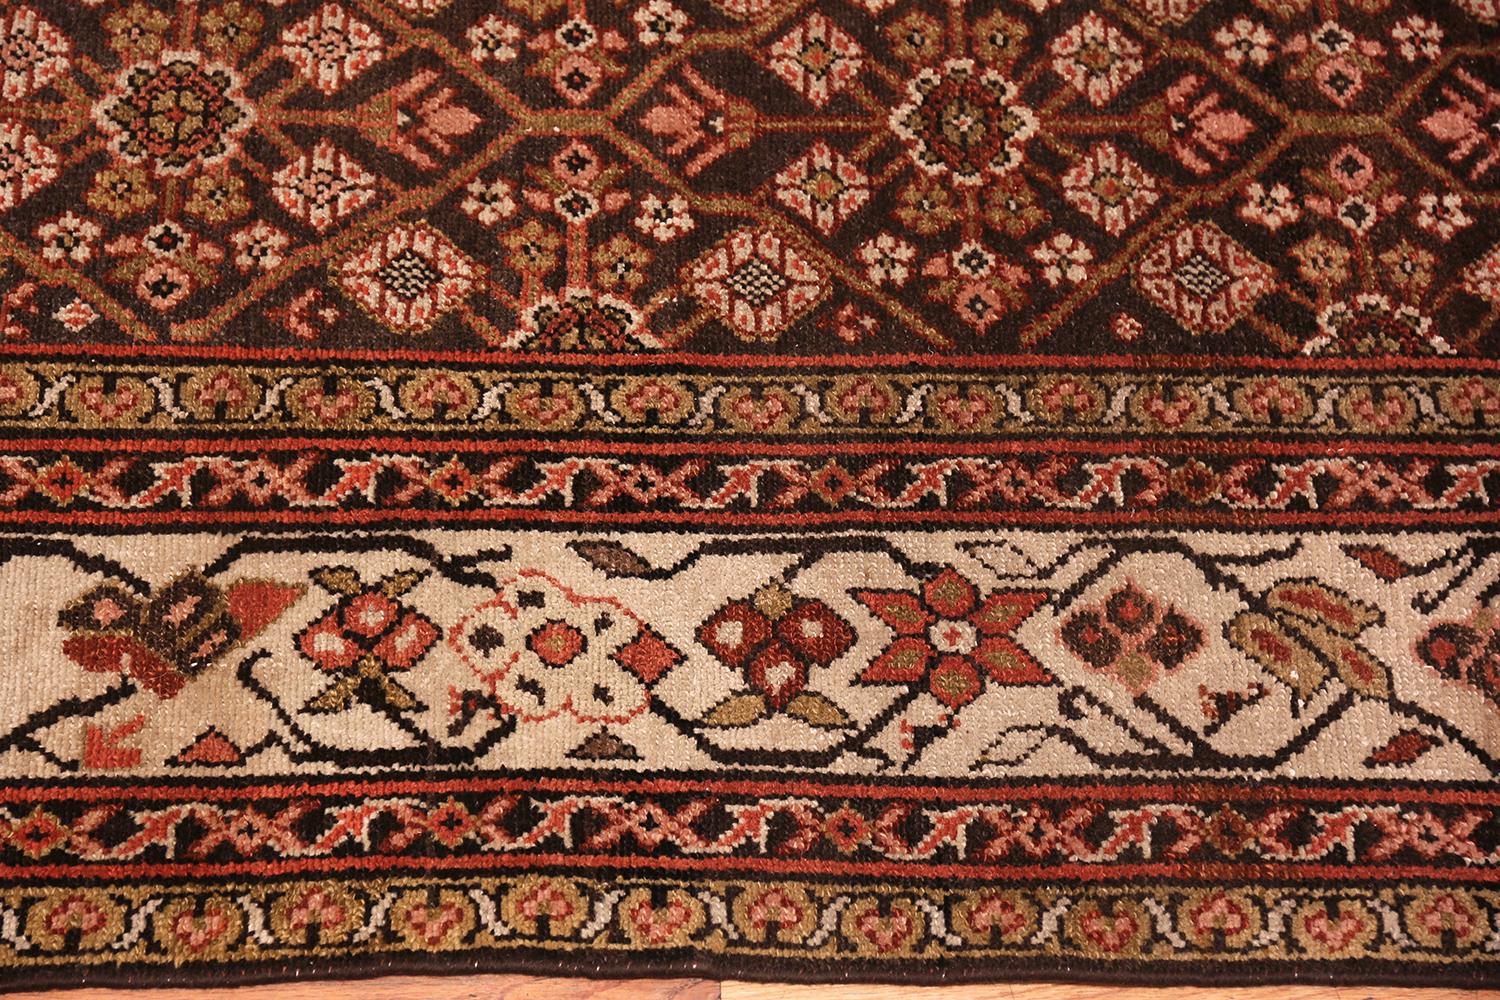 Breathtaking antique Persian Malayer runner rug, country of origin / rug type: Persian rug, date circa 1920. Size: 5 ft 2 in x 16 ft 7 in (1.57 m x 5.05 m).